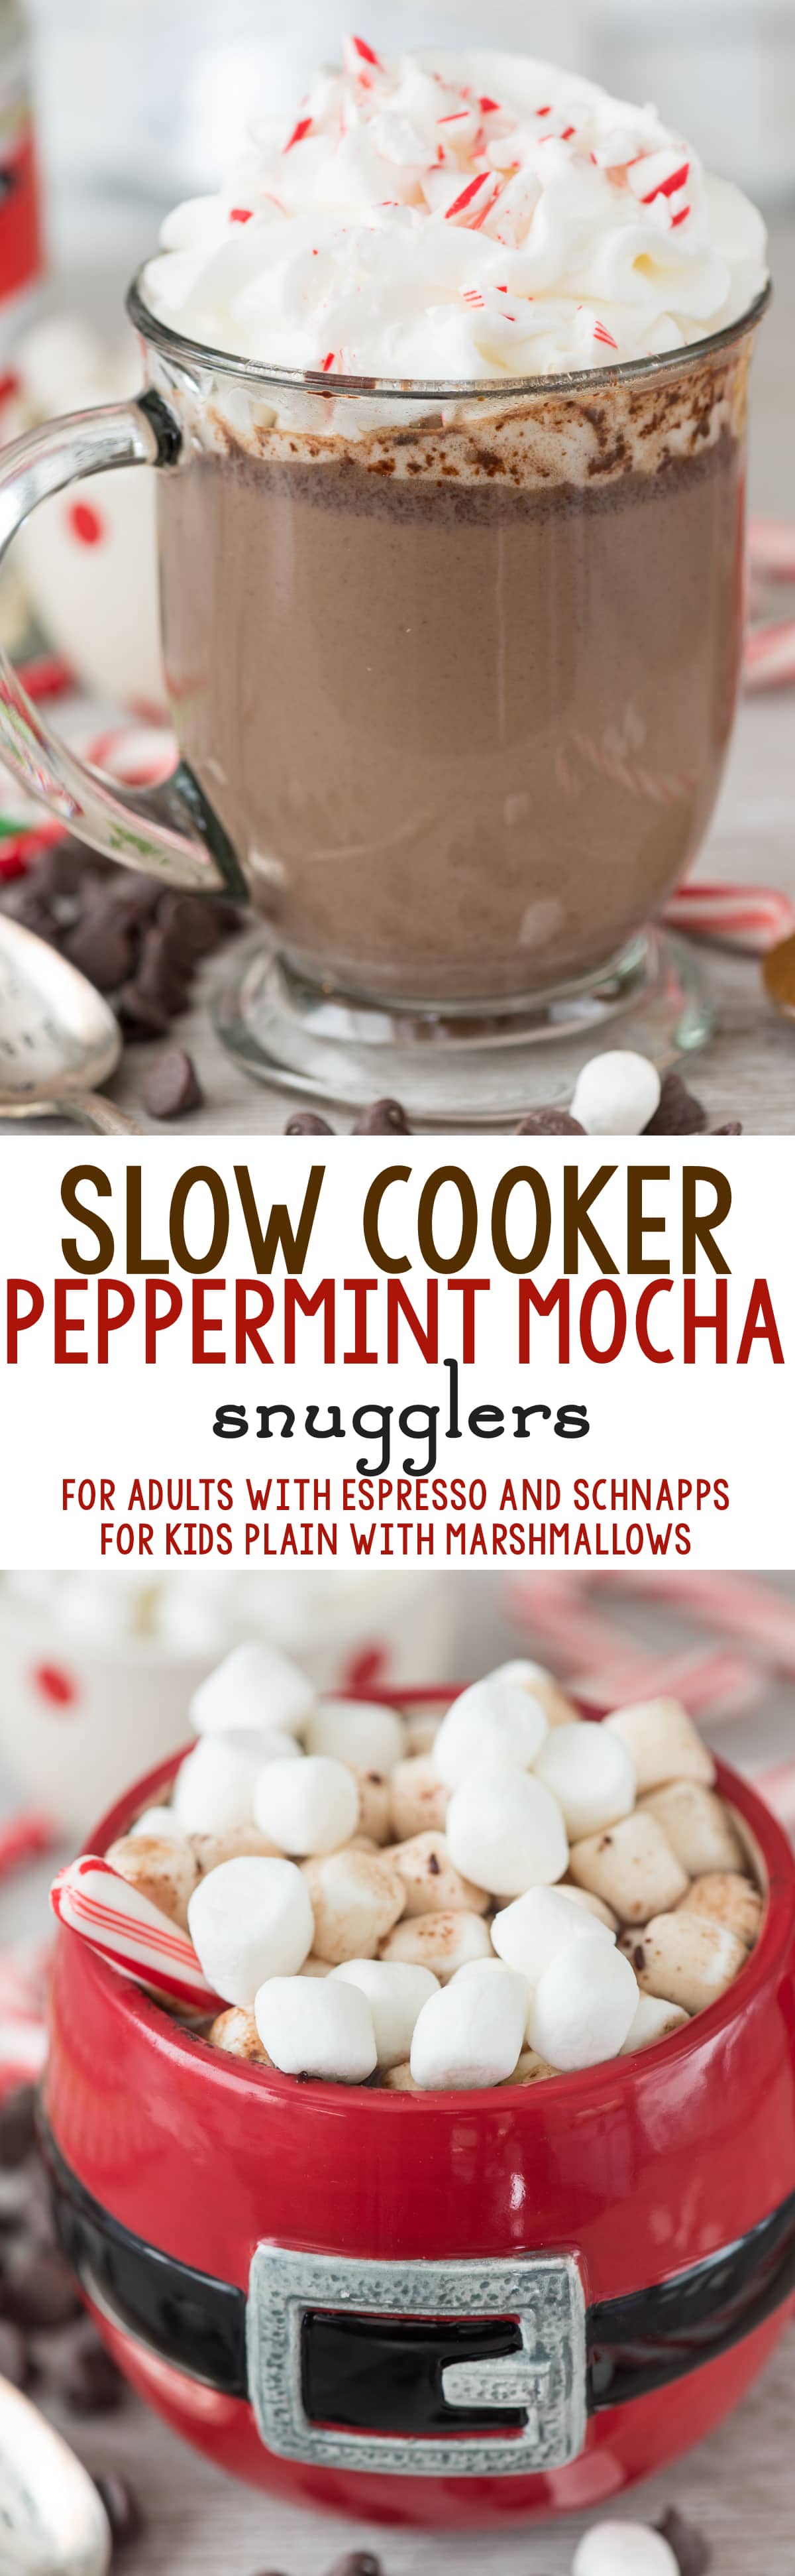 Slow Cooker Peppermint Mocha Snuggler - this easy crockpot hot chocolate recipe is filled with peppermint flavor! Keep it plain for kids or make it an adult cocktail with espresso and schnapps!